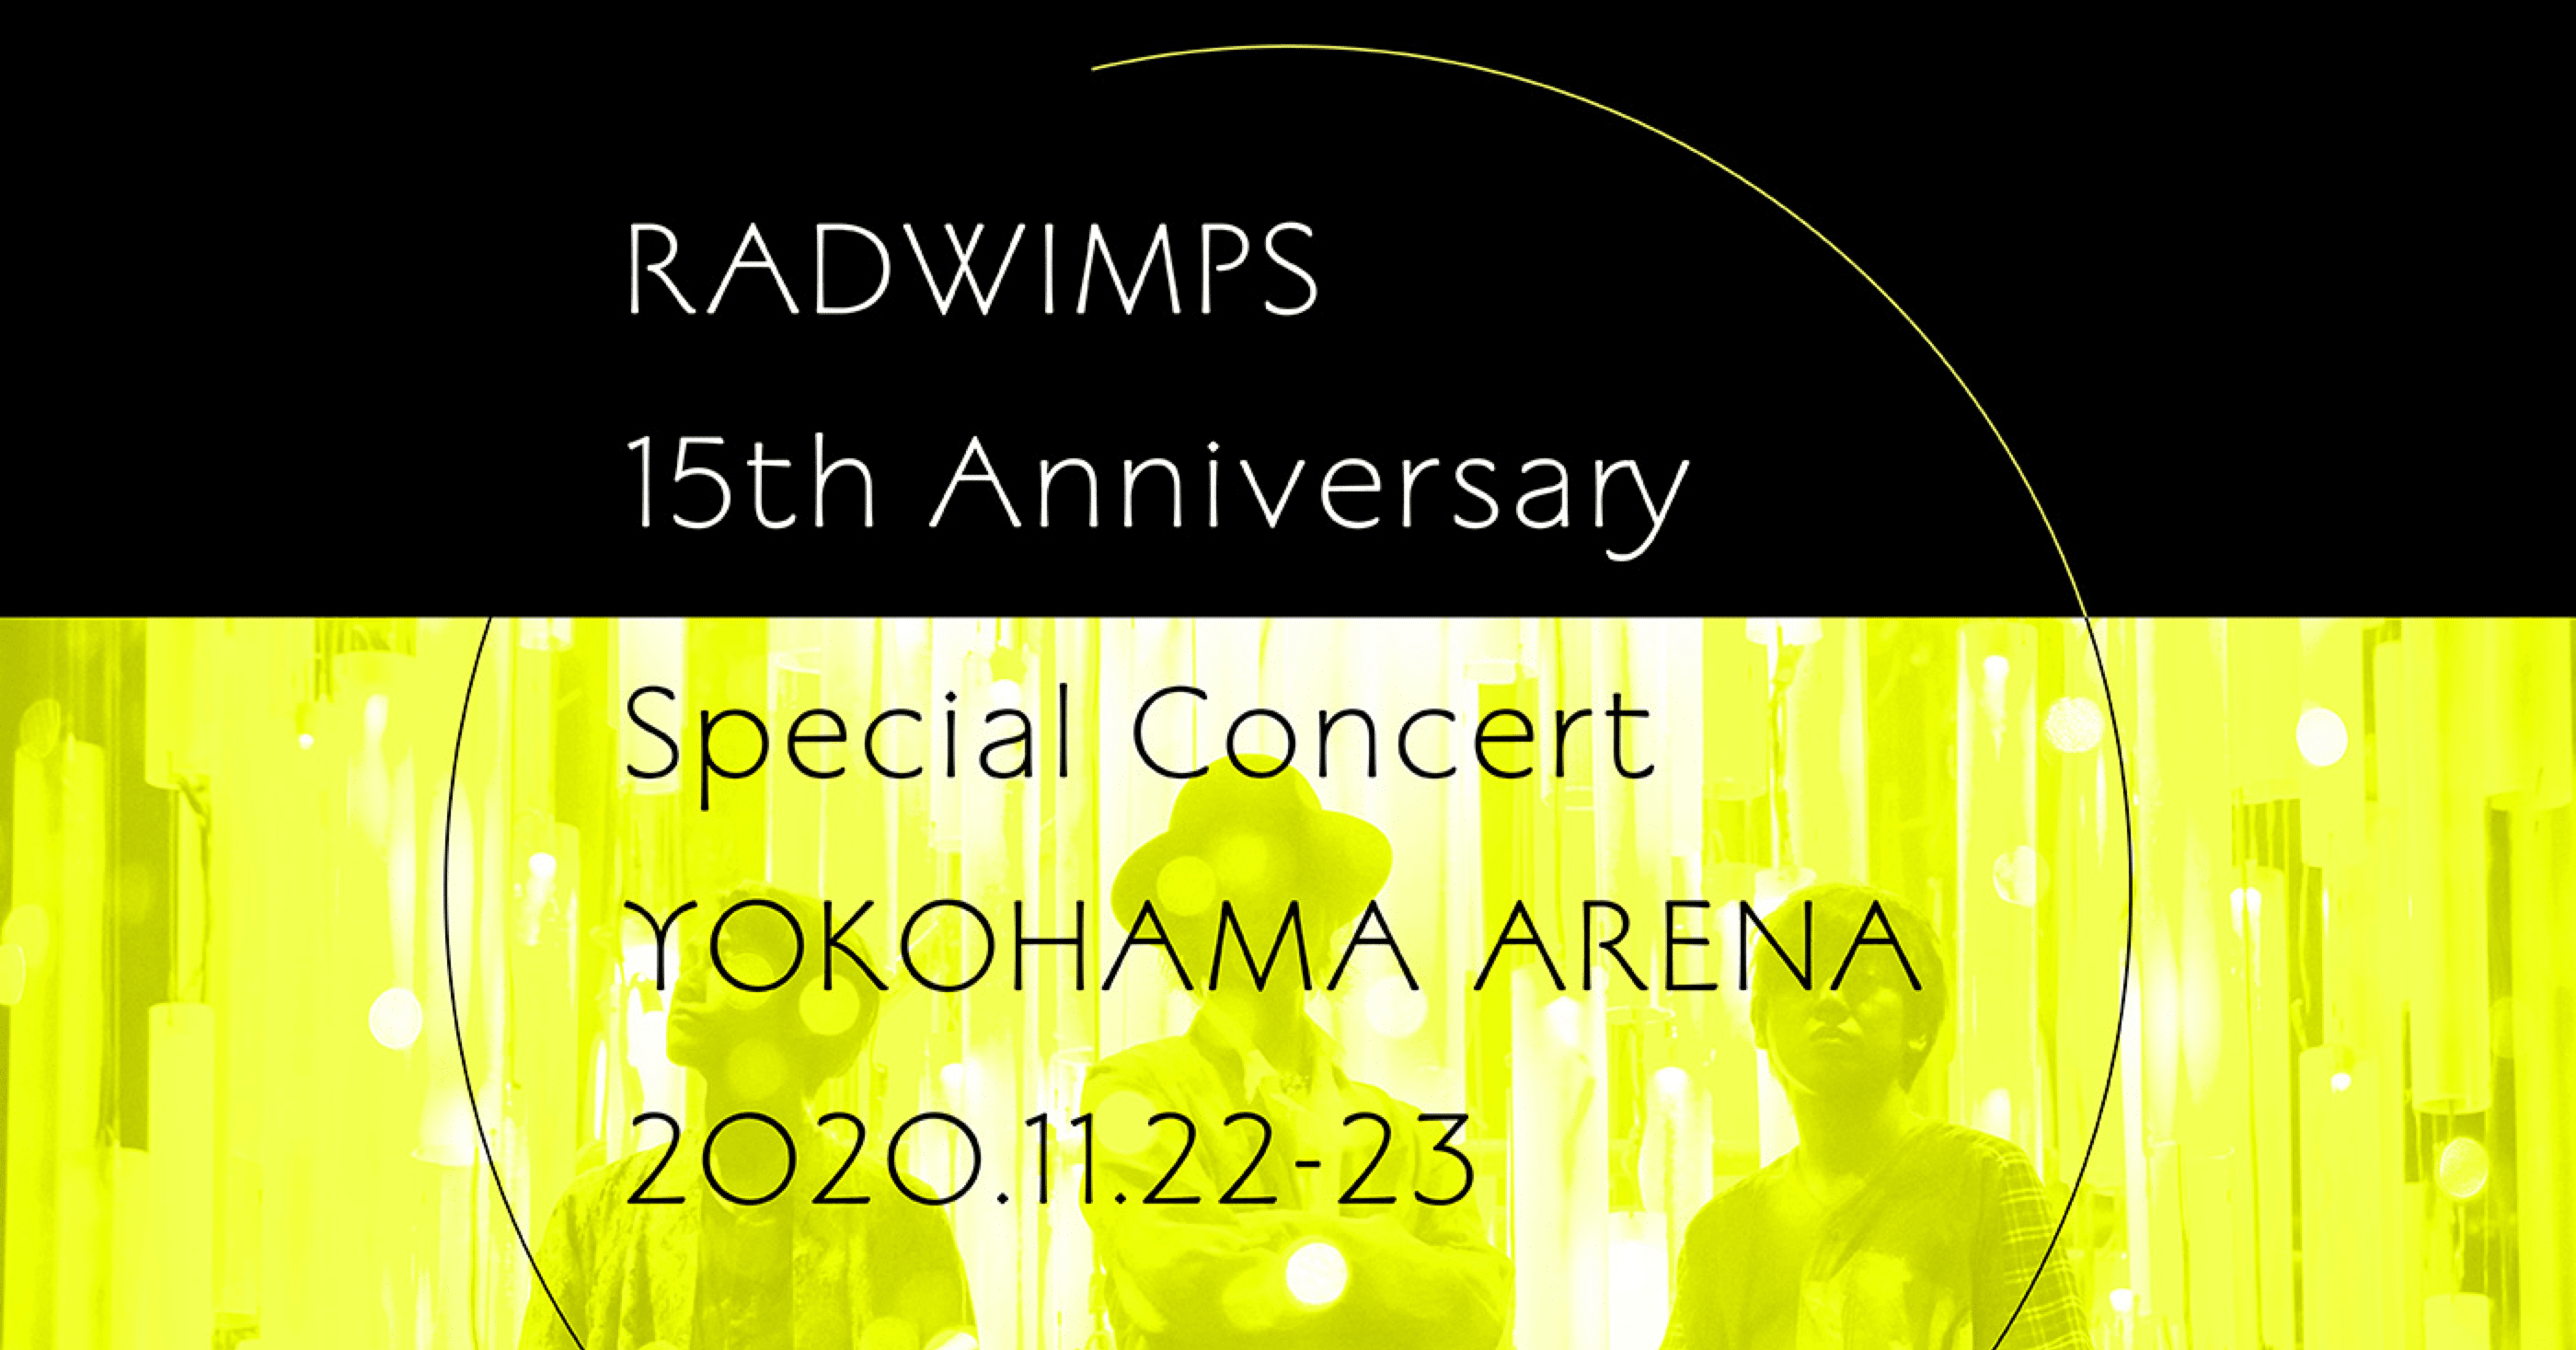 11 23 Radwimps 15th Anniversary Special Concert 横浜アリーナという祝祭 月の人 Note